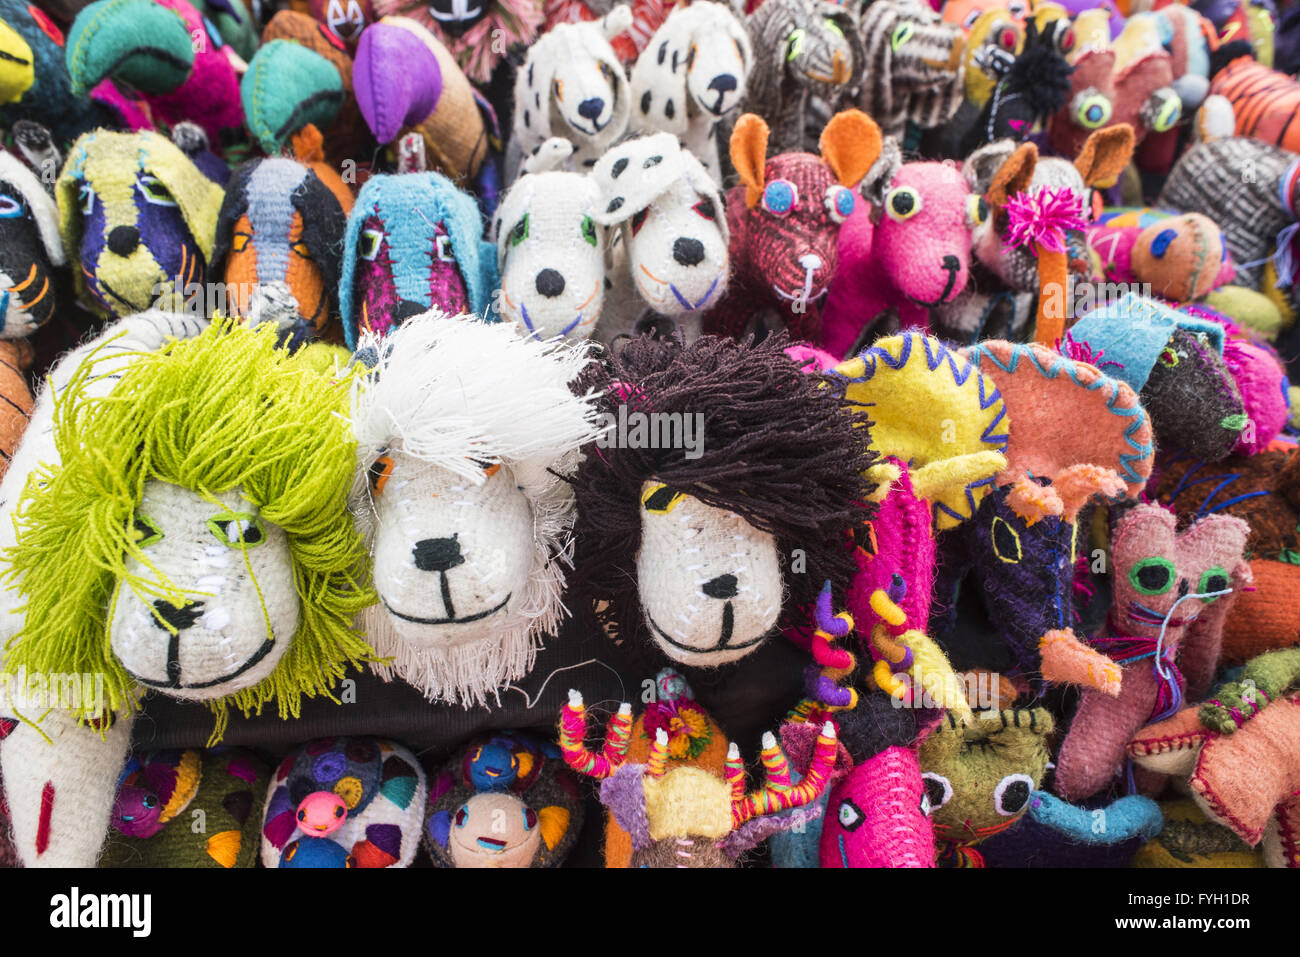 Close up of colorful animal handmade toy souvenirs in display at mexican street market. Stock Photo